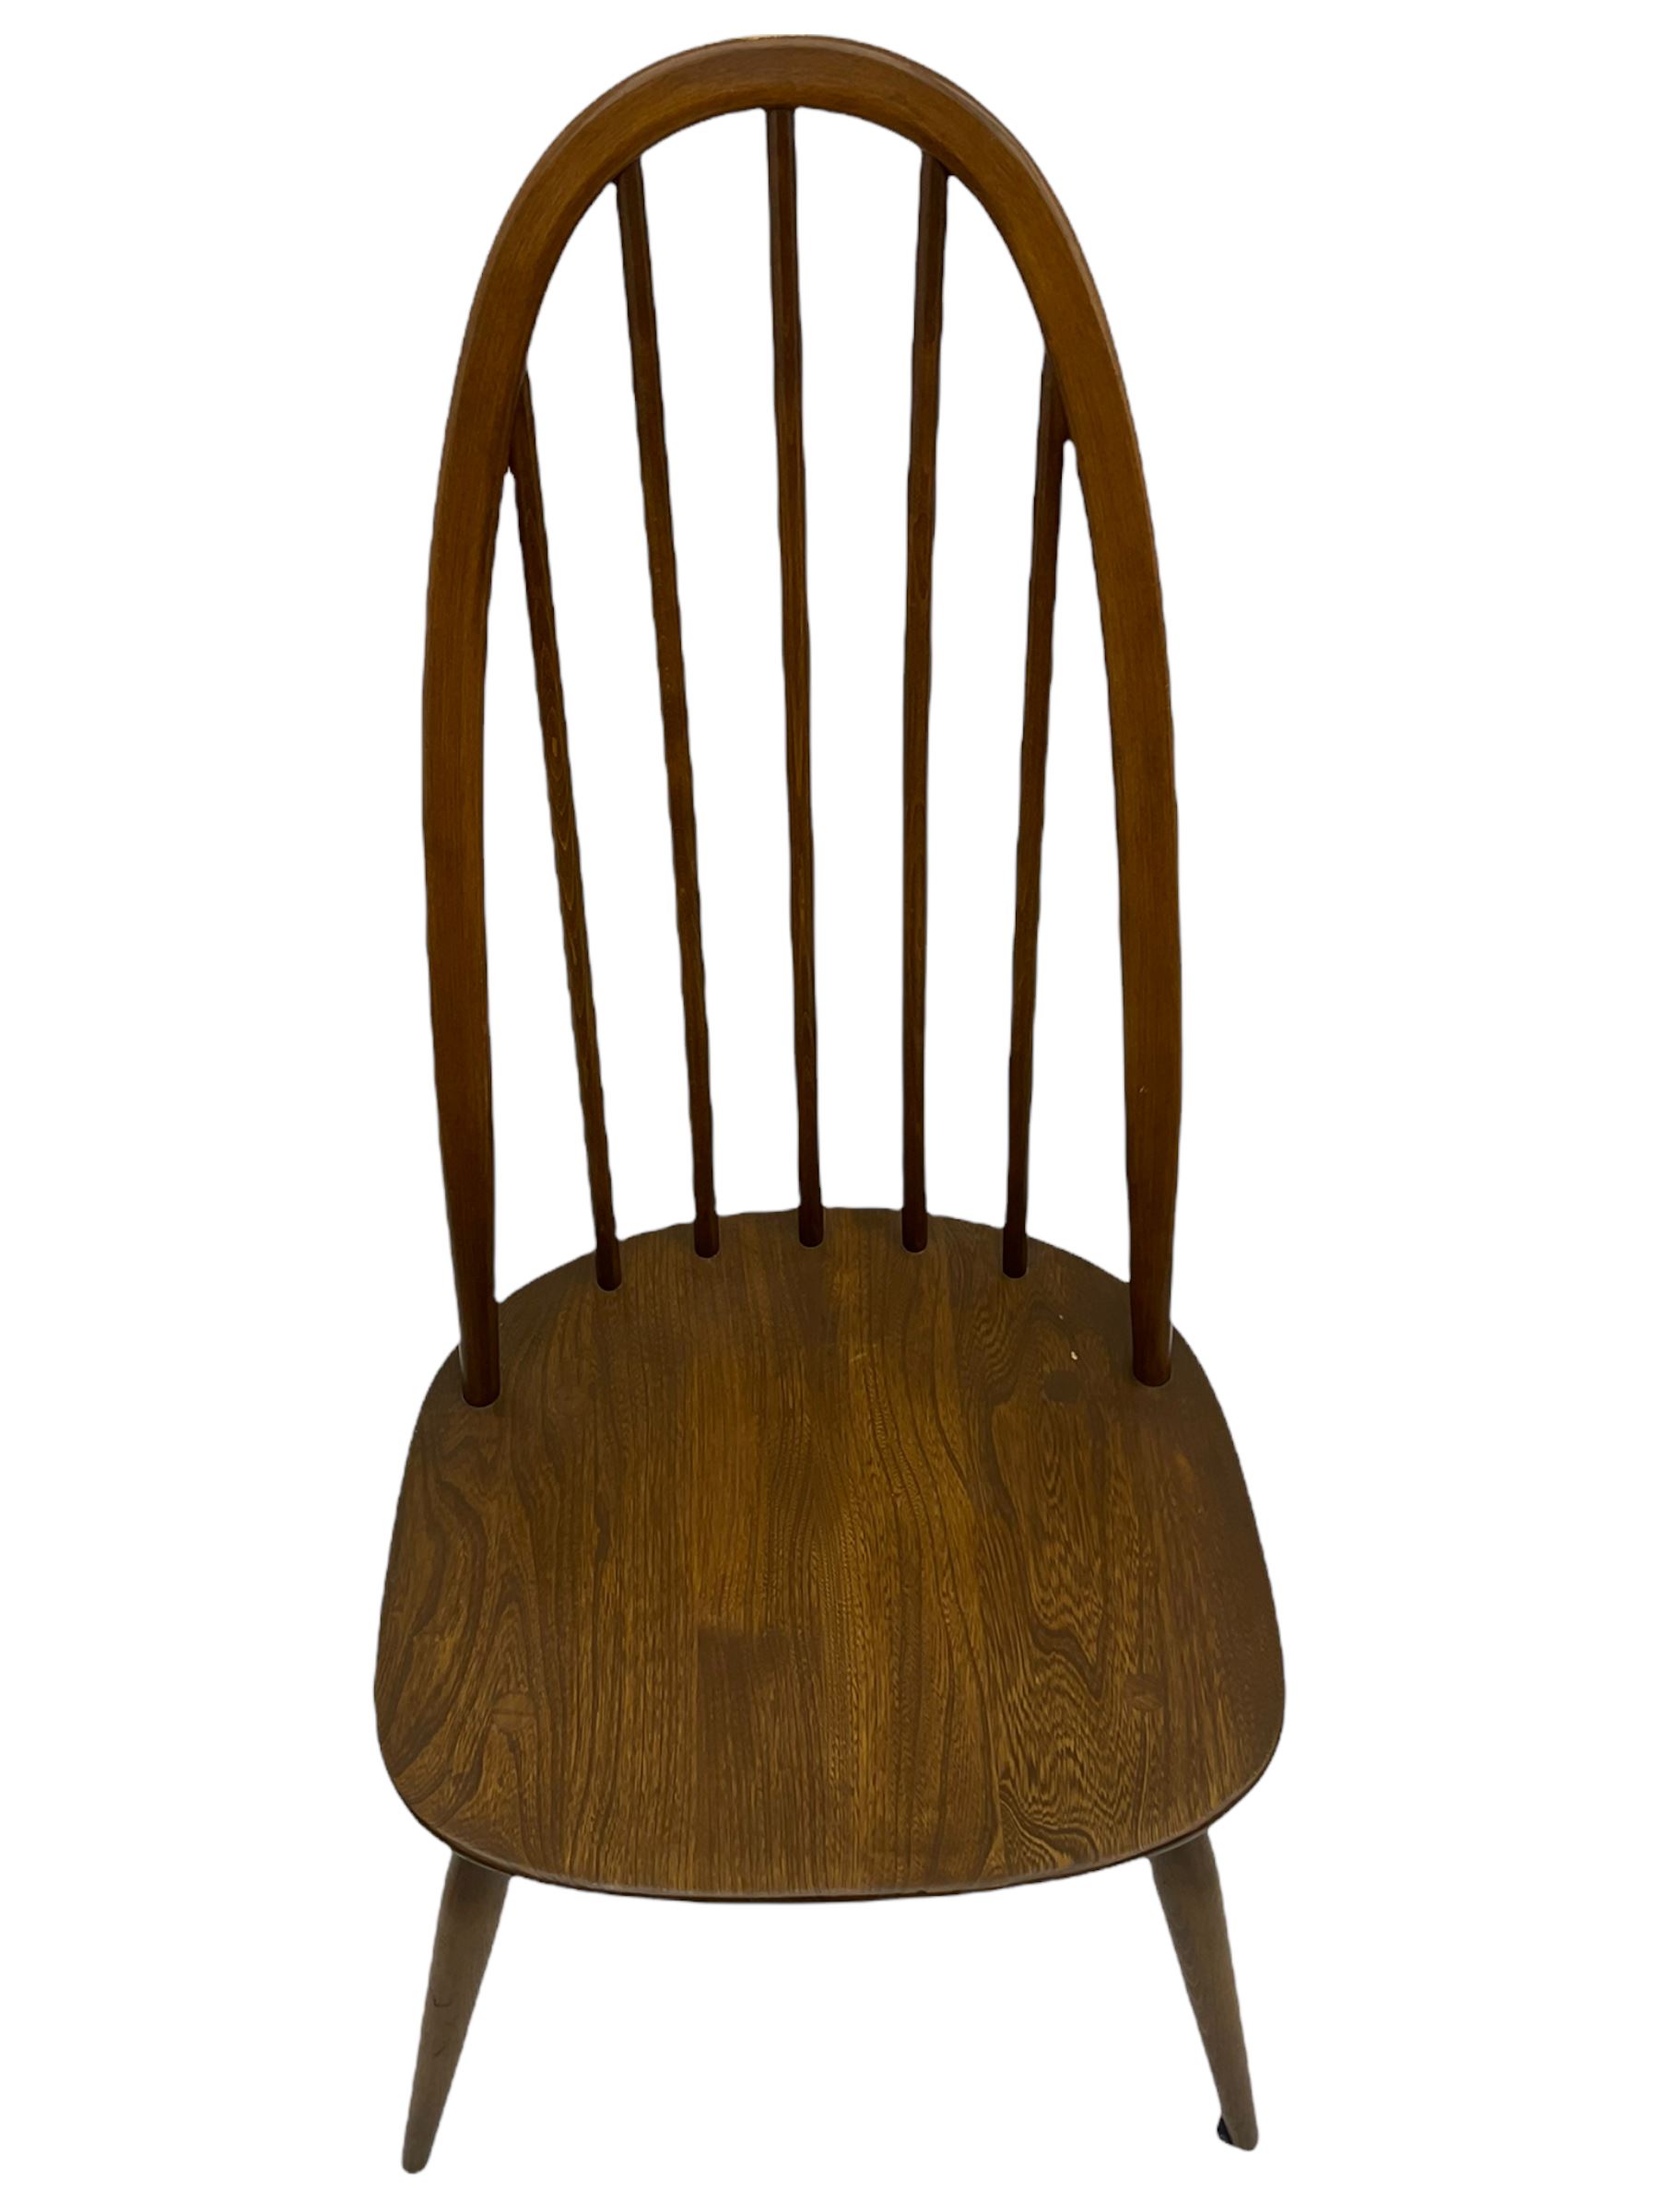 Four Ercol medium elm and beech chairs - Image 8 of 8